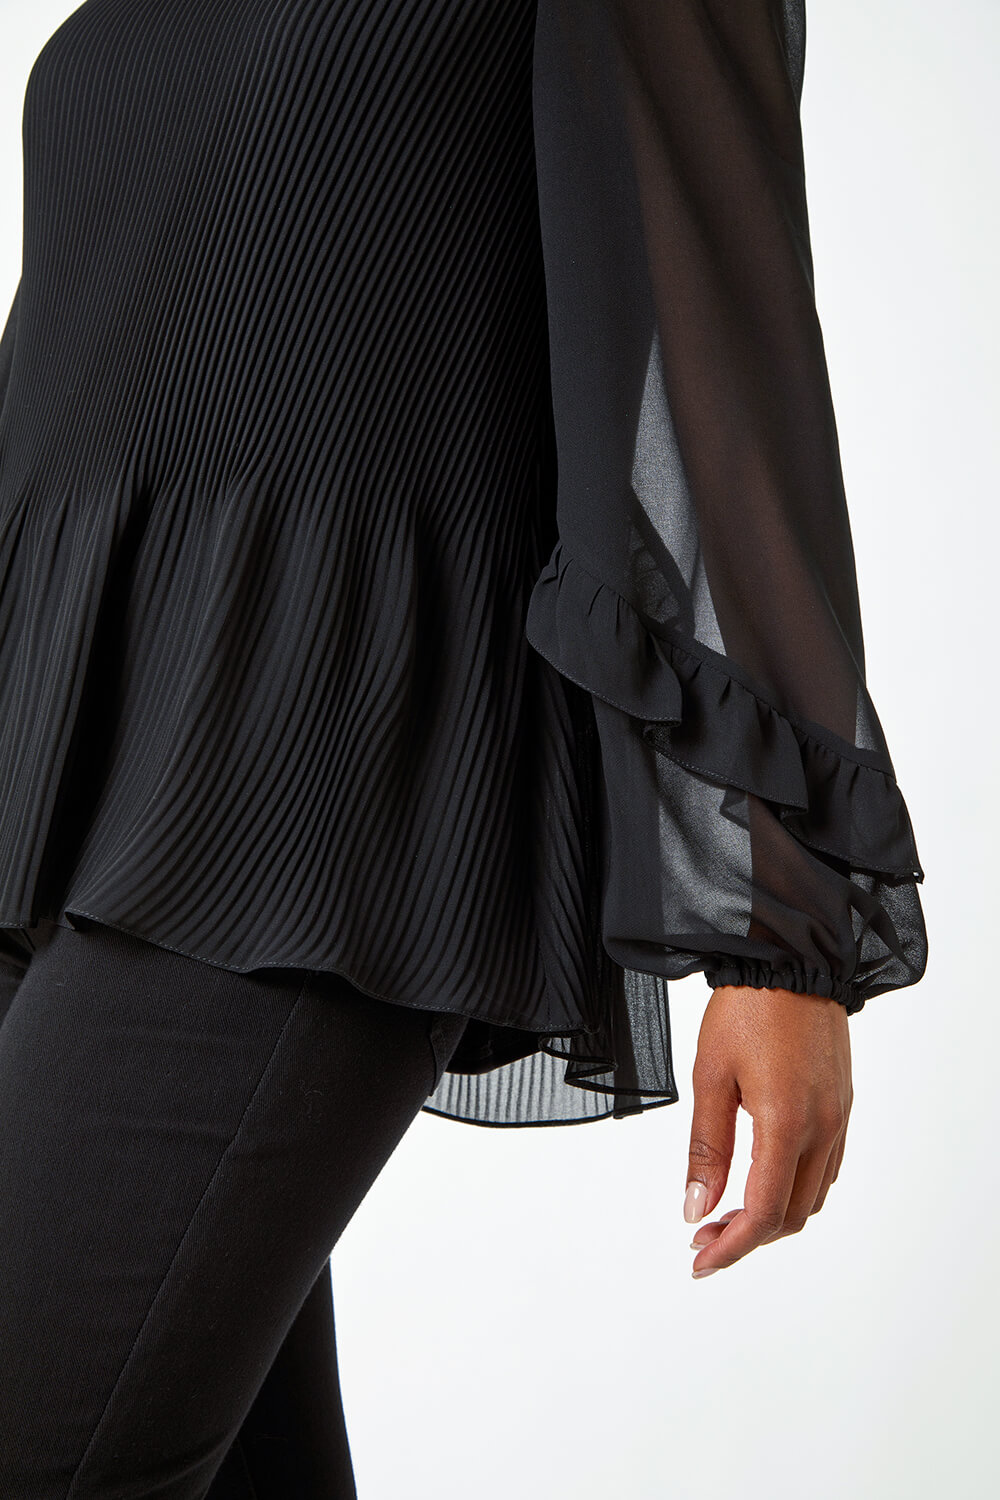 Black Petite Pleated Frill Detail Top, Image 5 of 5